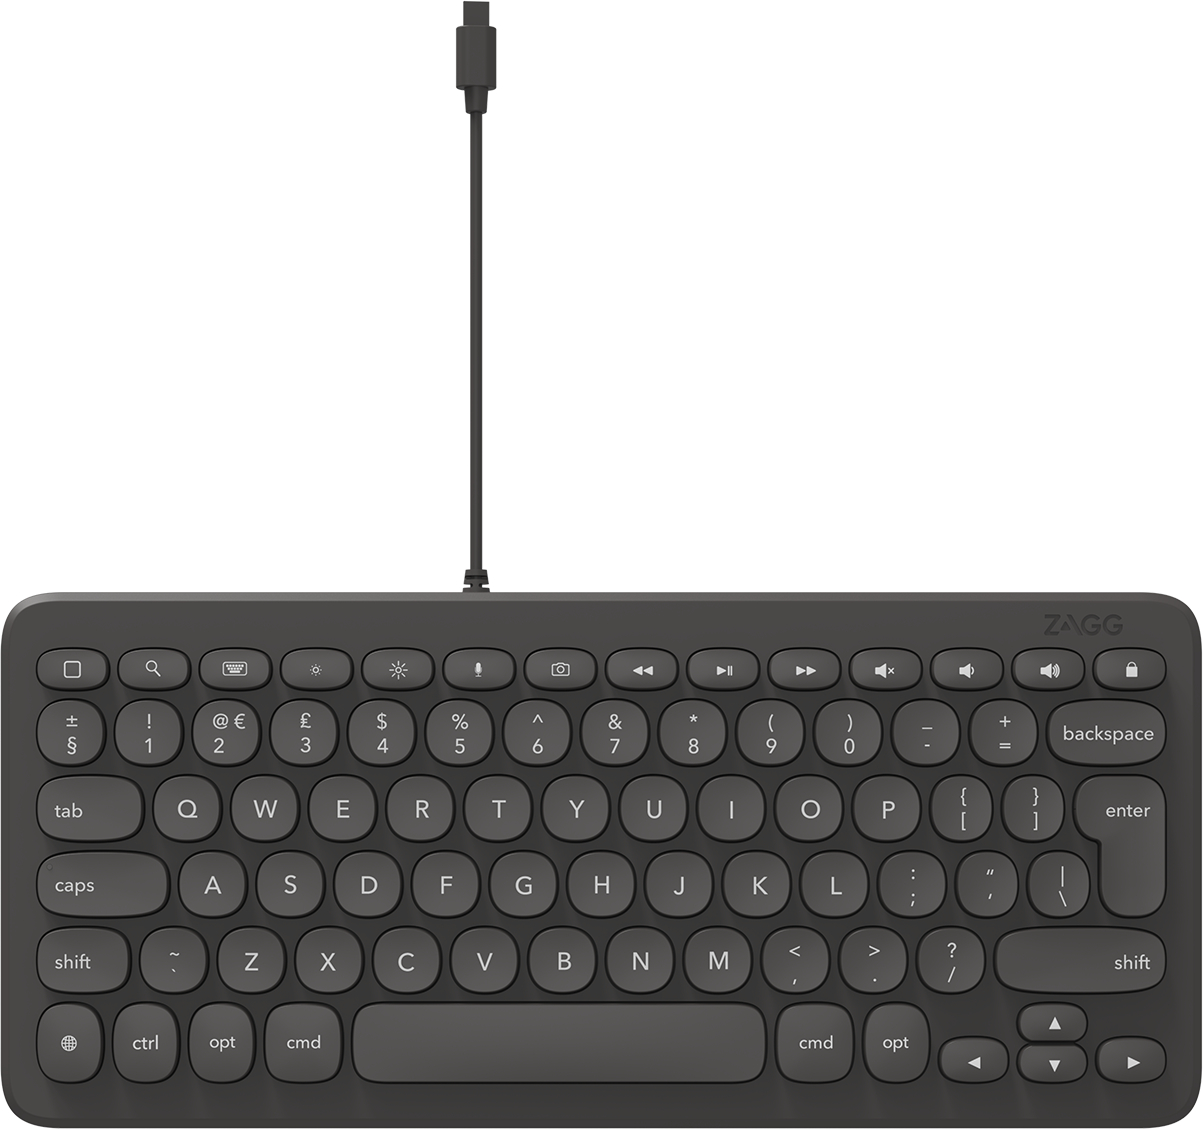 ZAGG Keyboard Lightning universal 103211040 for iPad Wired,Charcoal, CH